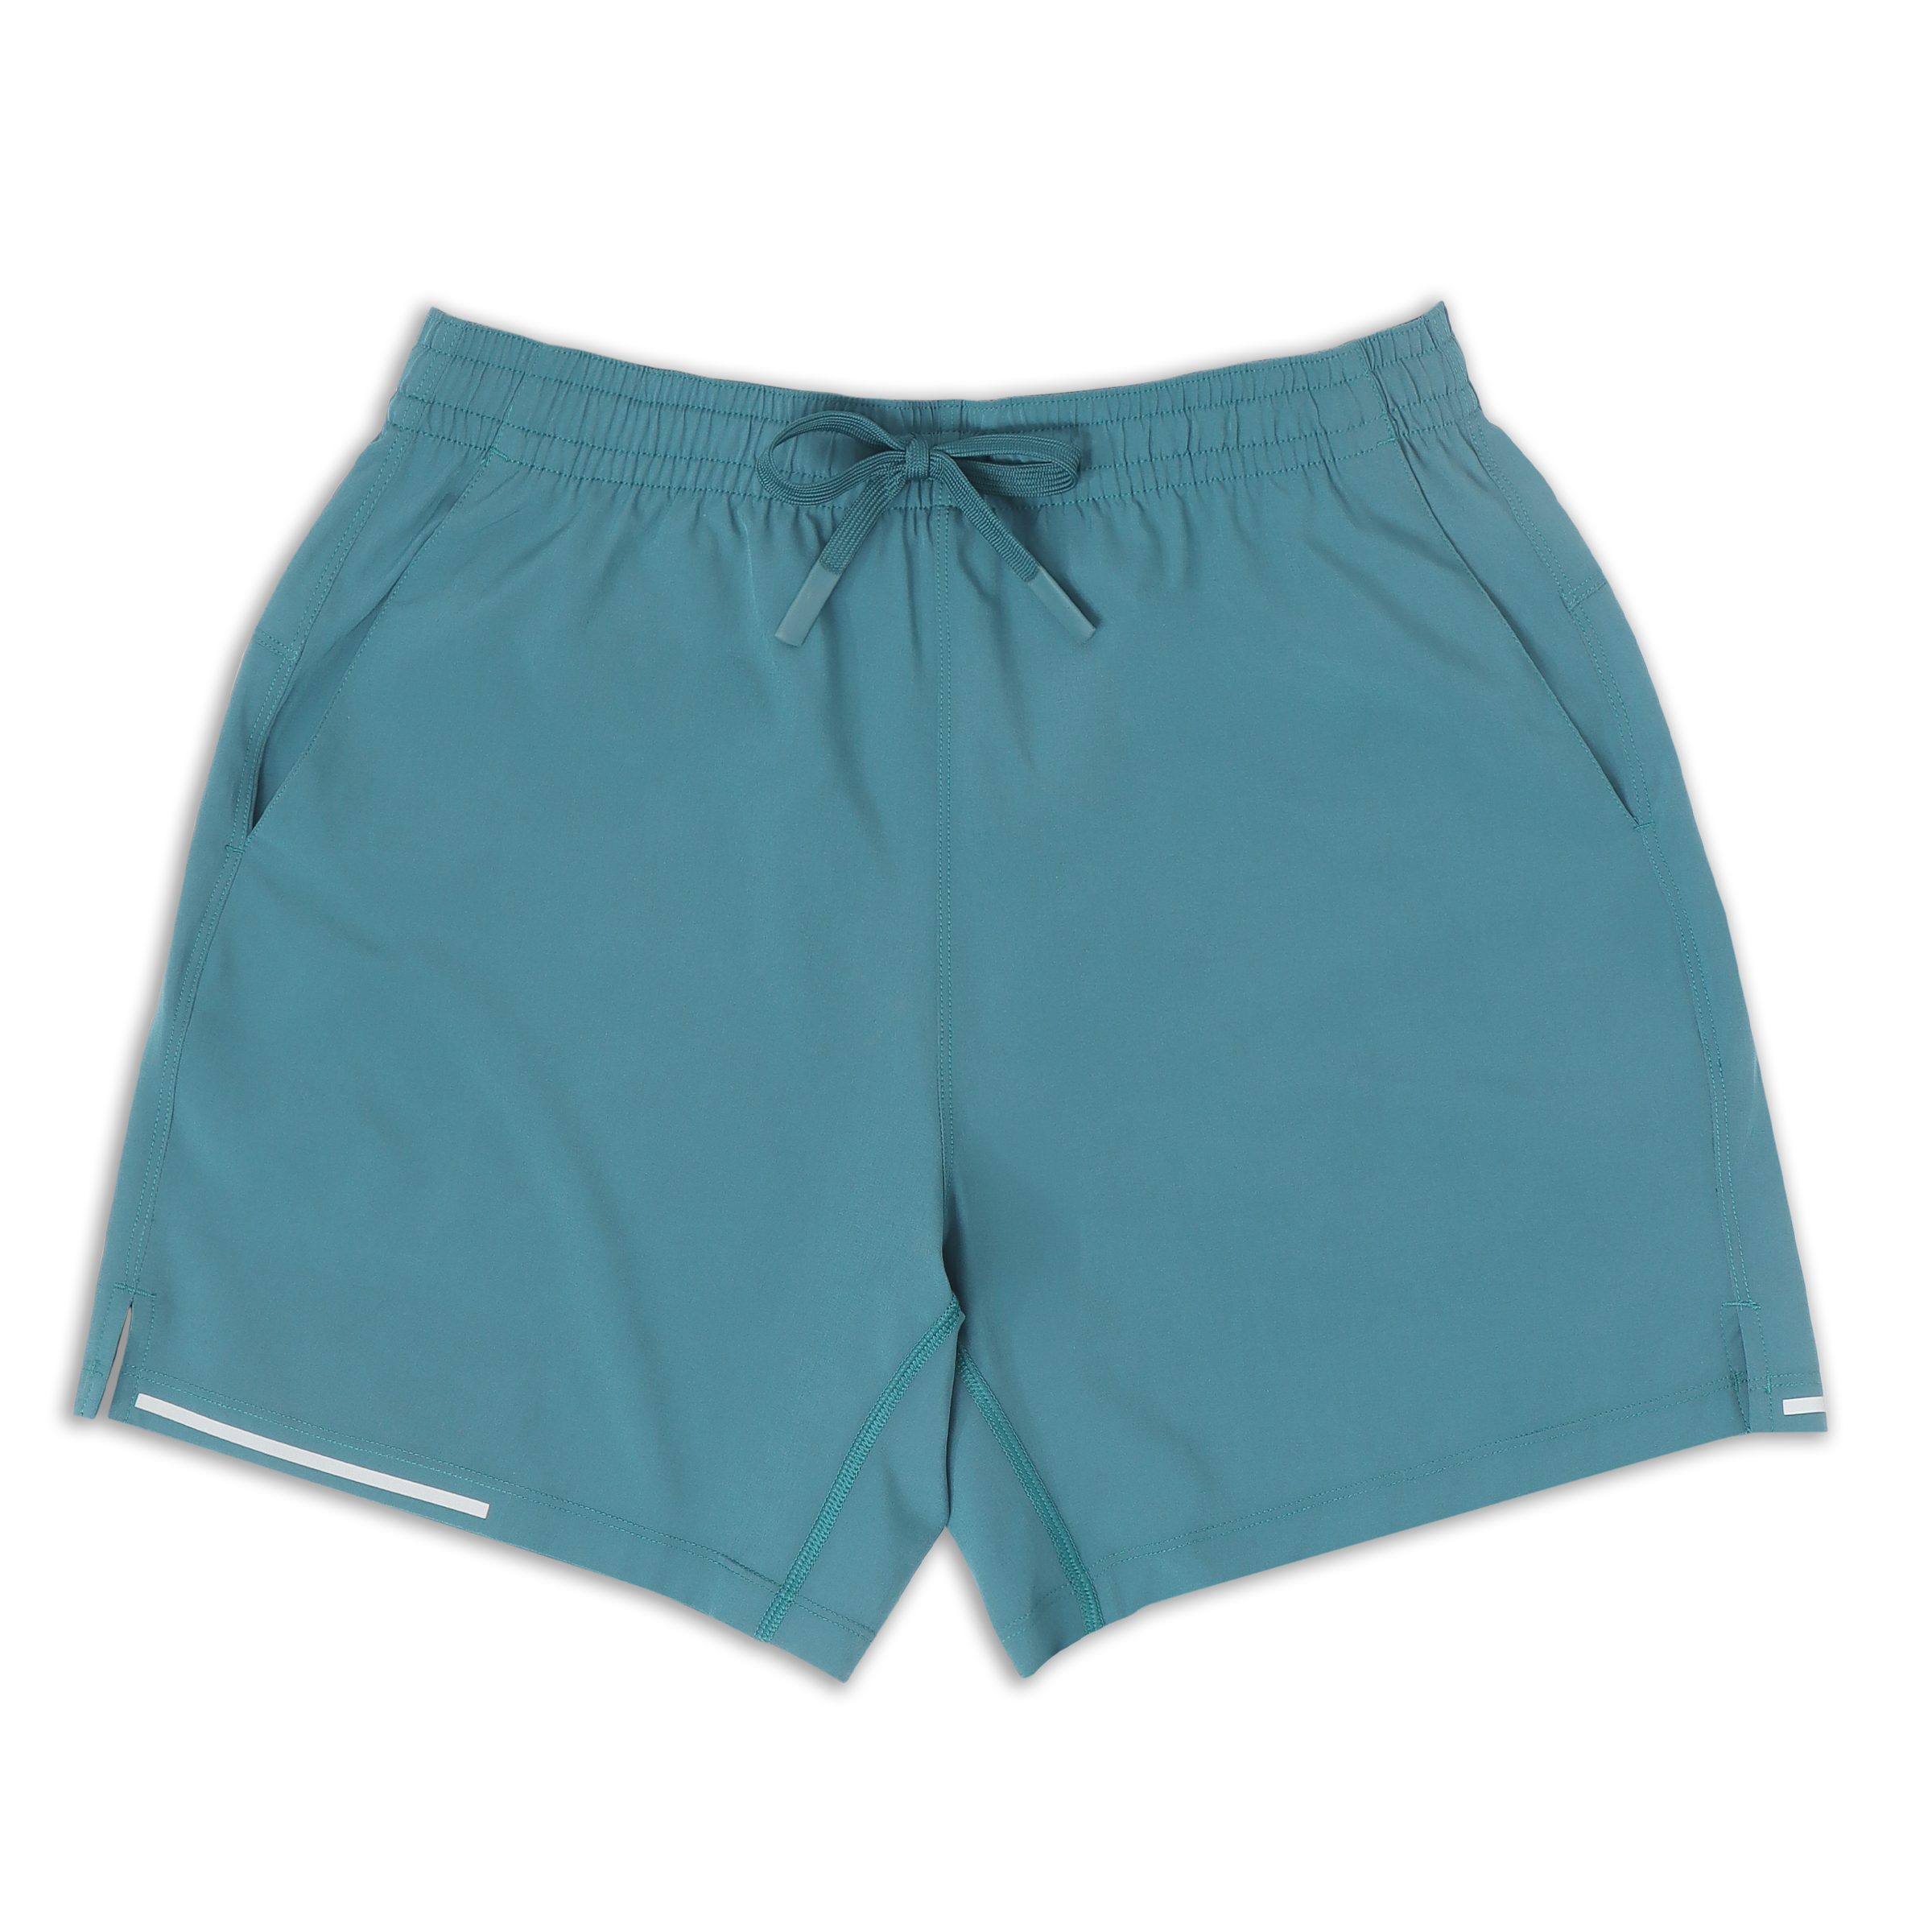 Run Short 5.5" Ocean blue front with elastic waistband, dyed-to-match drawstring with rubberized tips, two front pockets, split hem, and reflective line on bottom right hem